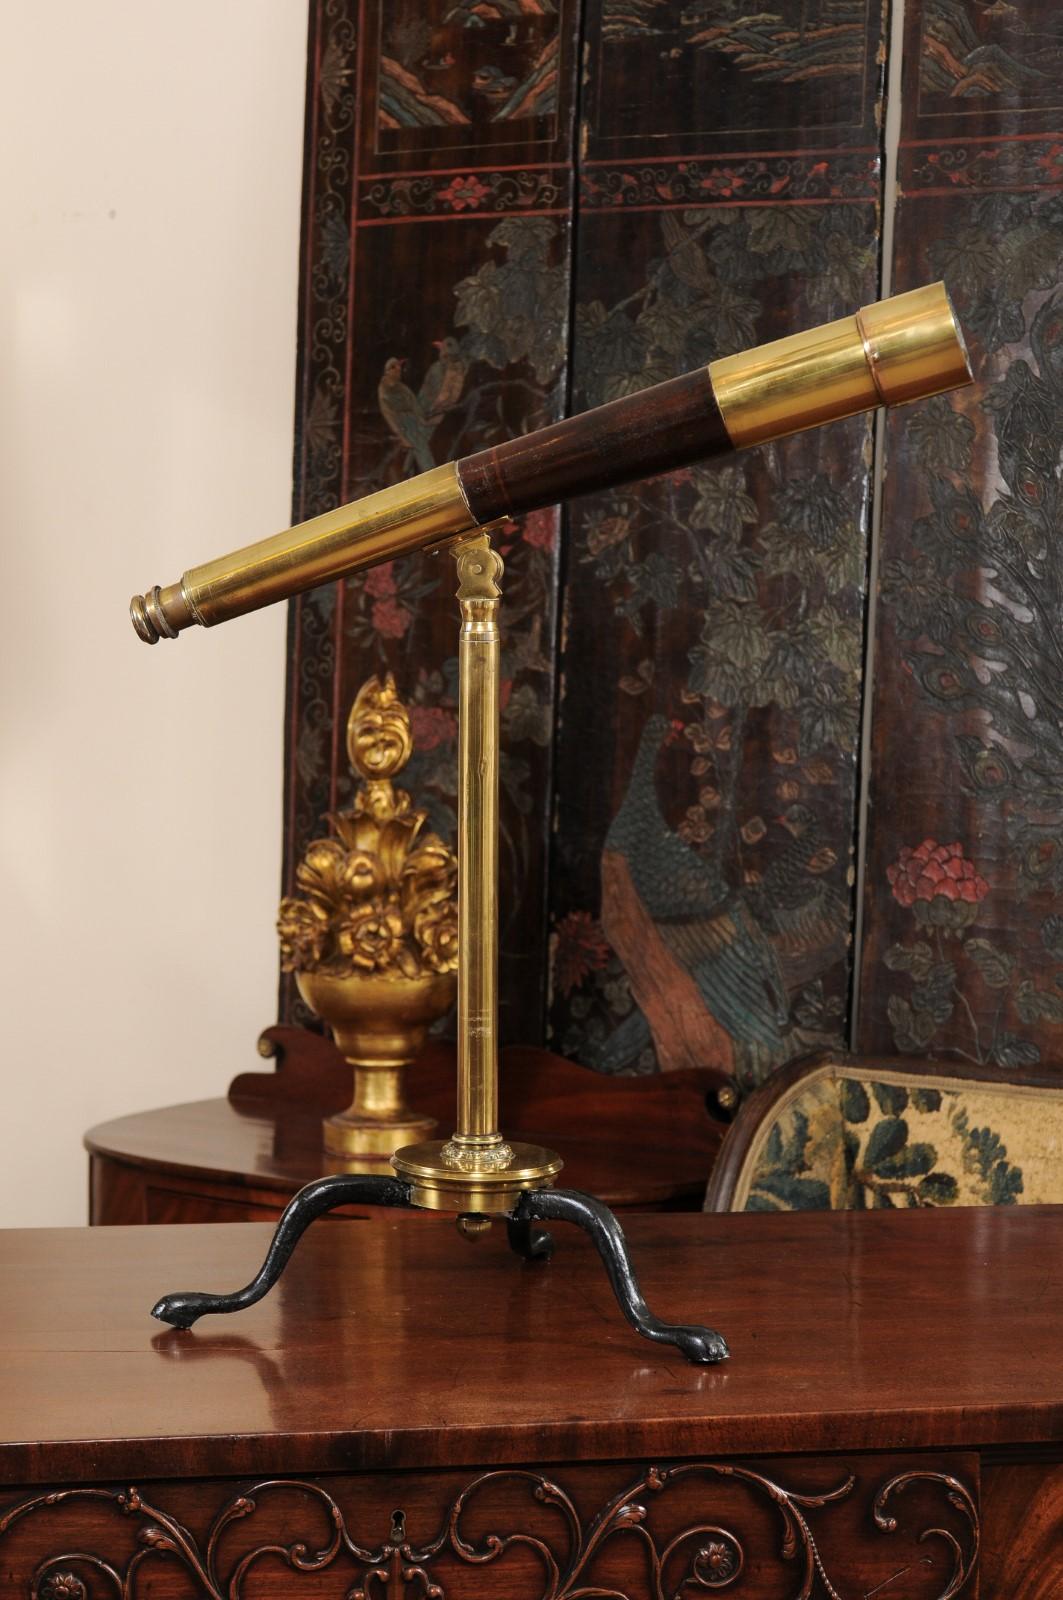 The telescope on Stand with leather/brass barrel and black painted tripod feet, signed 